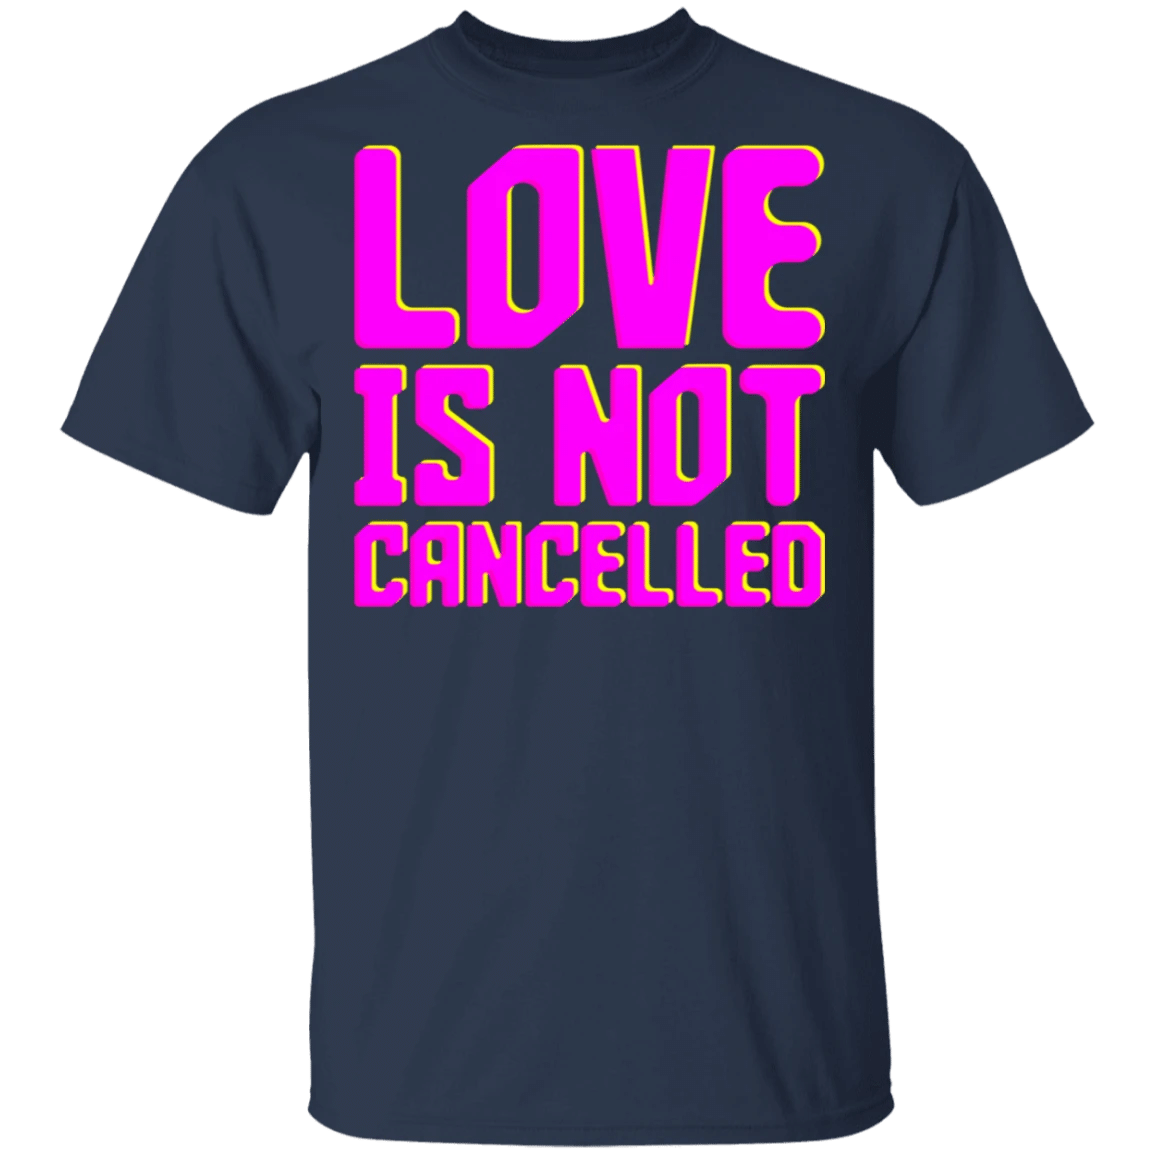 Love Is Not Cancelled T Shirt Love Is Not Cancelled Quote Women Men Apparel Gift